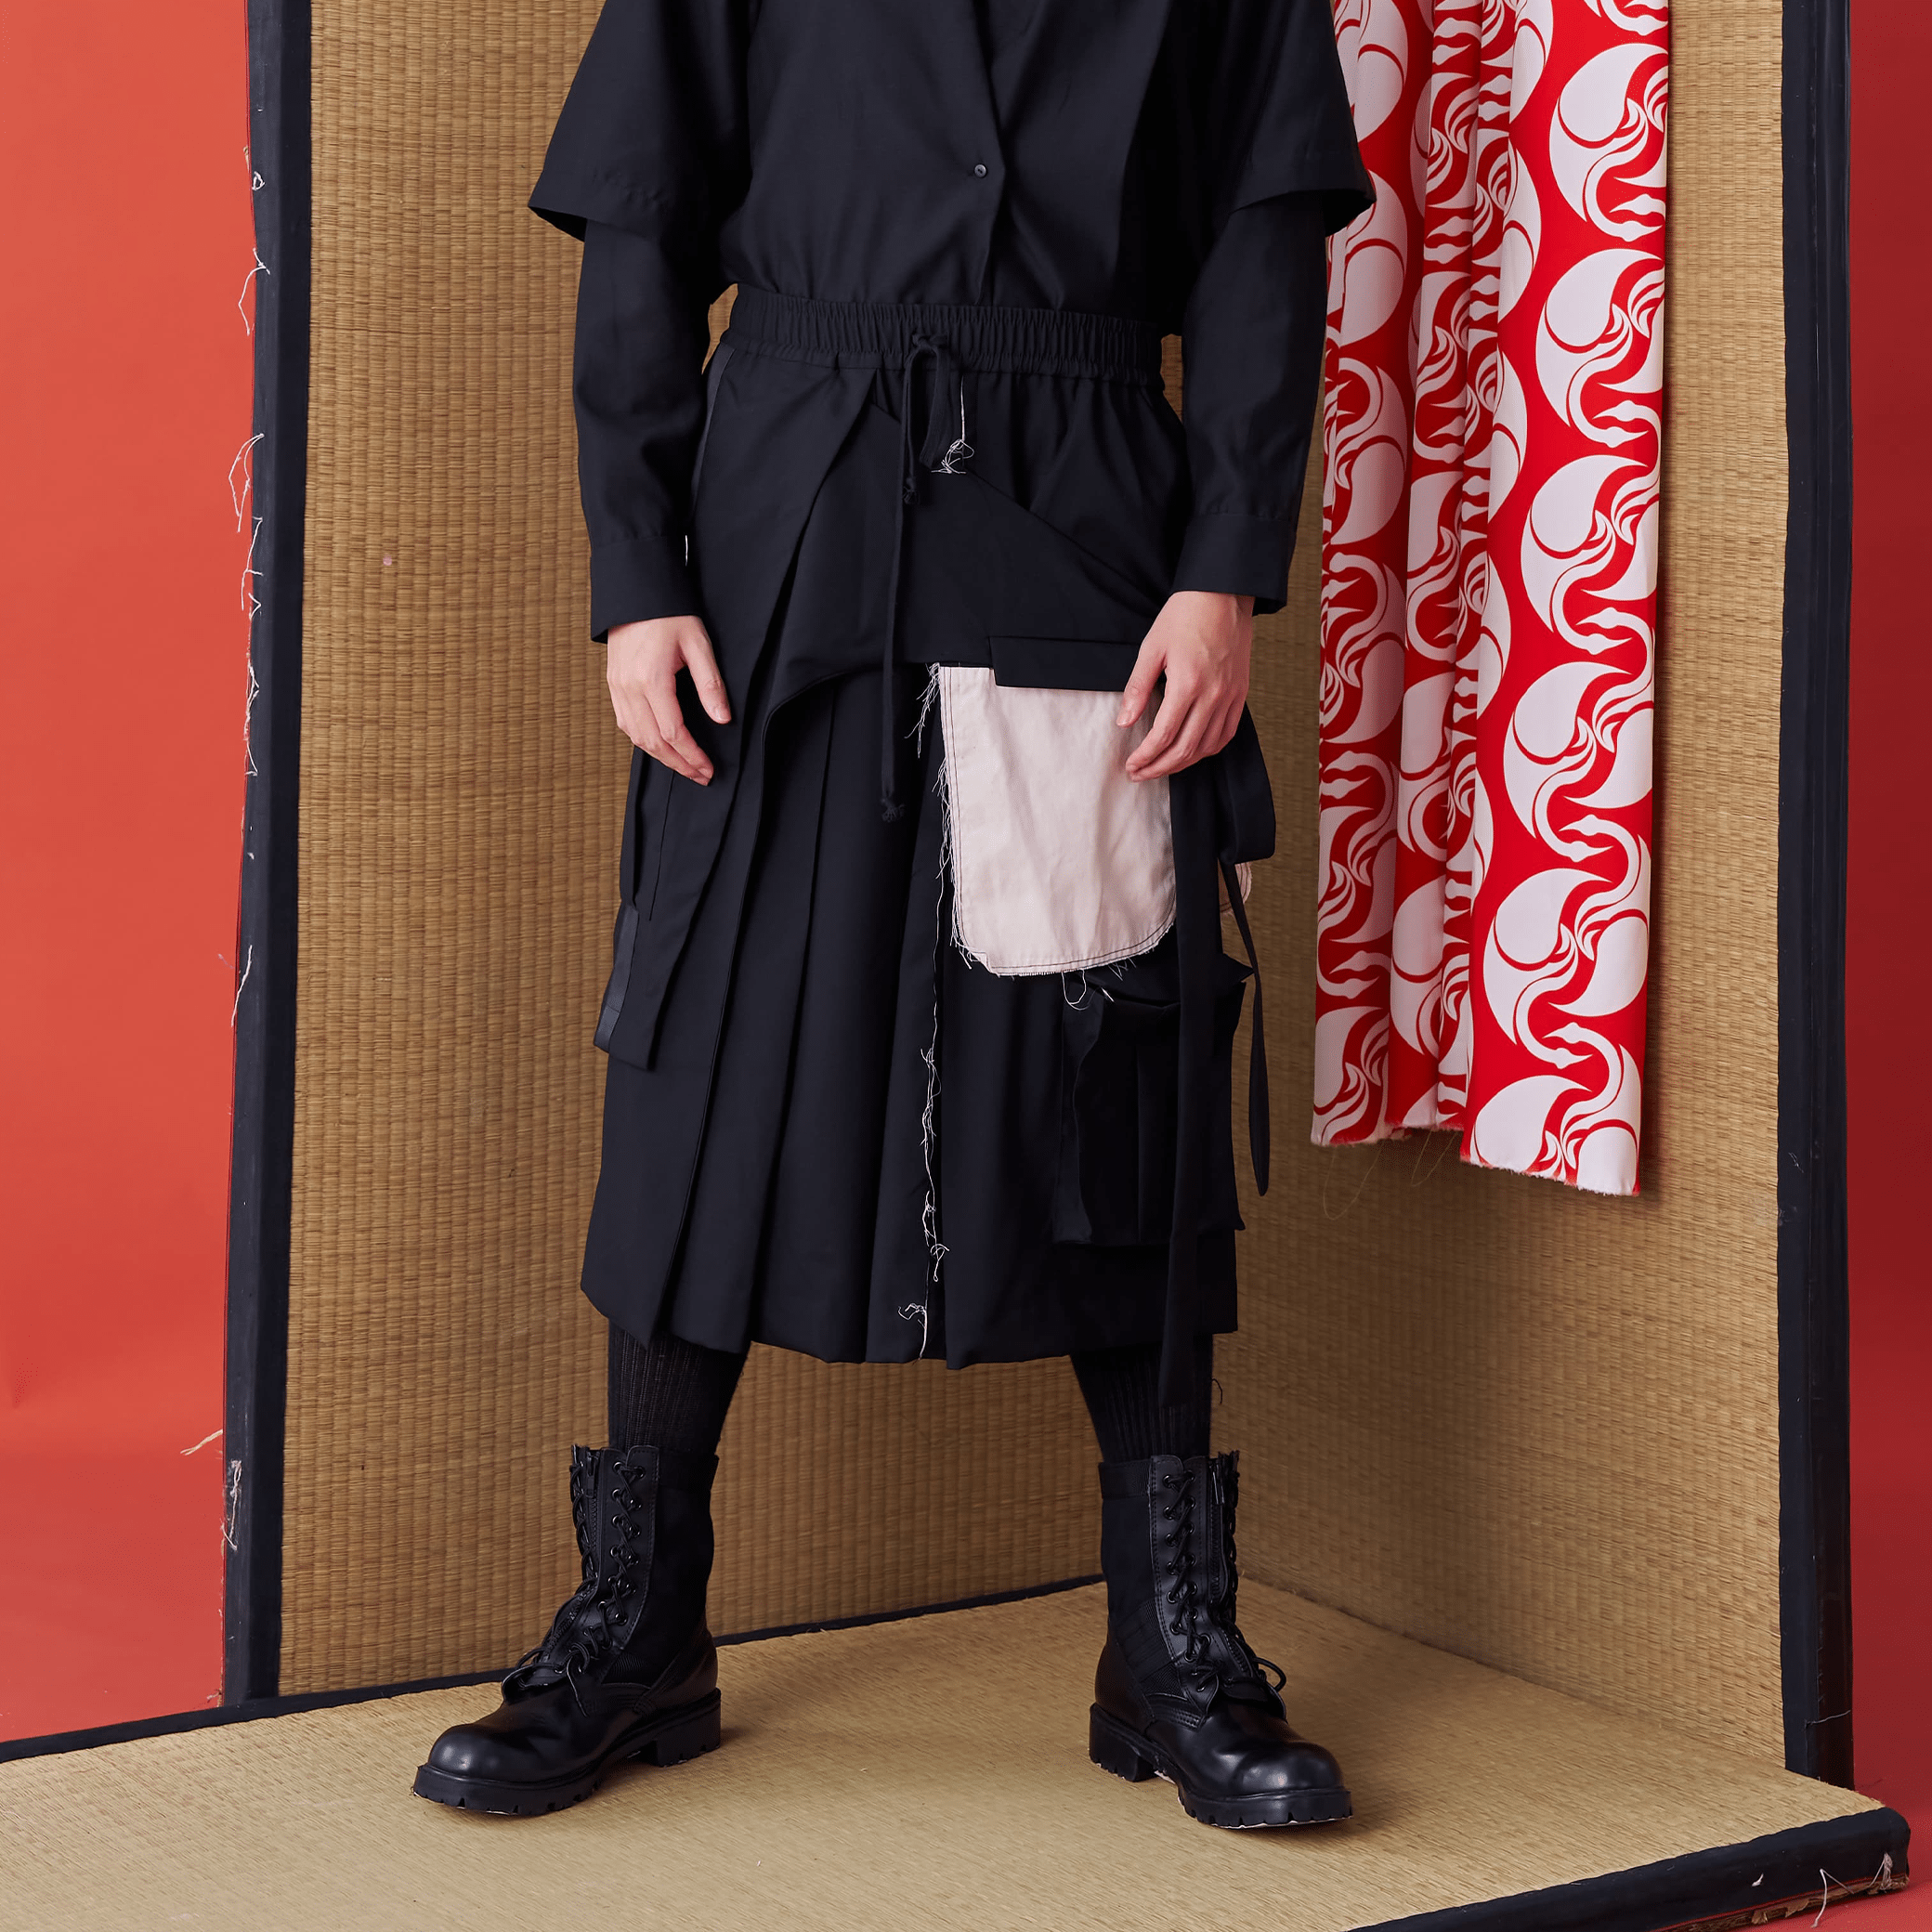 Multilayered deconstructed Japanese-style wide shorts - Avant Gardist